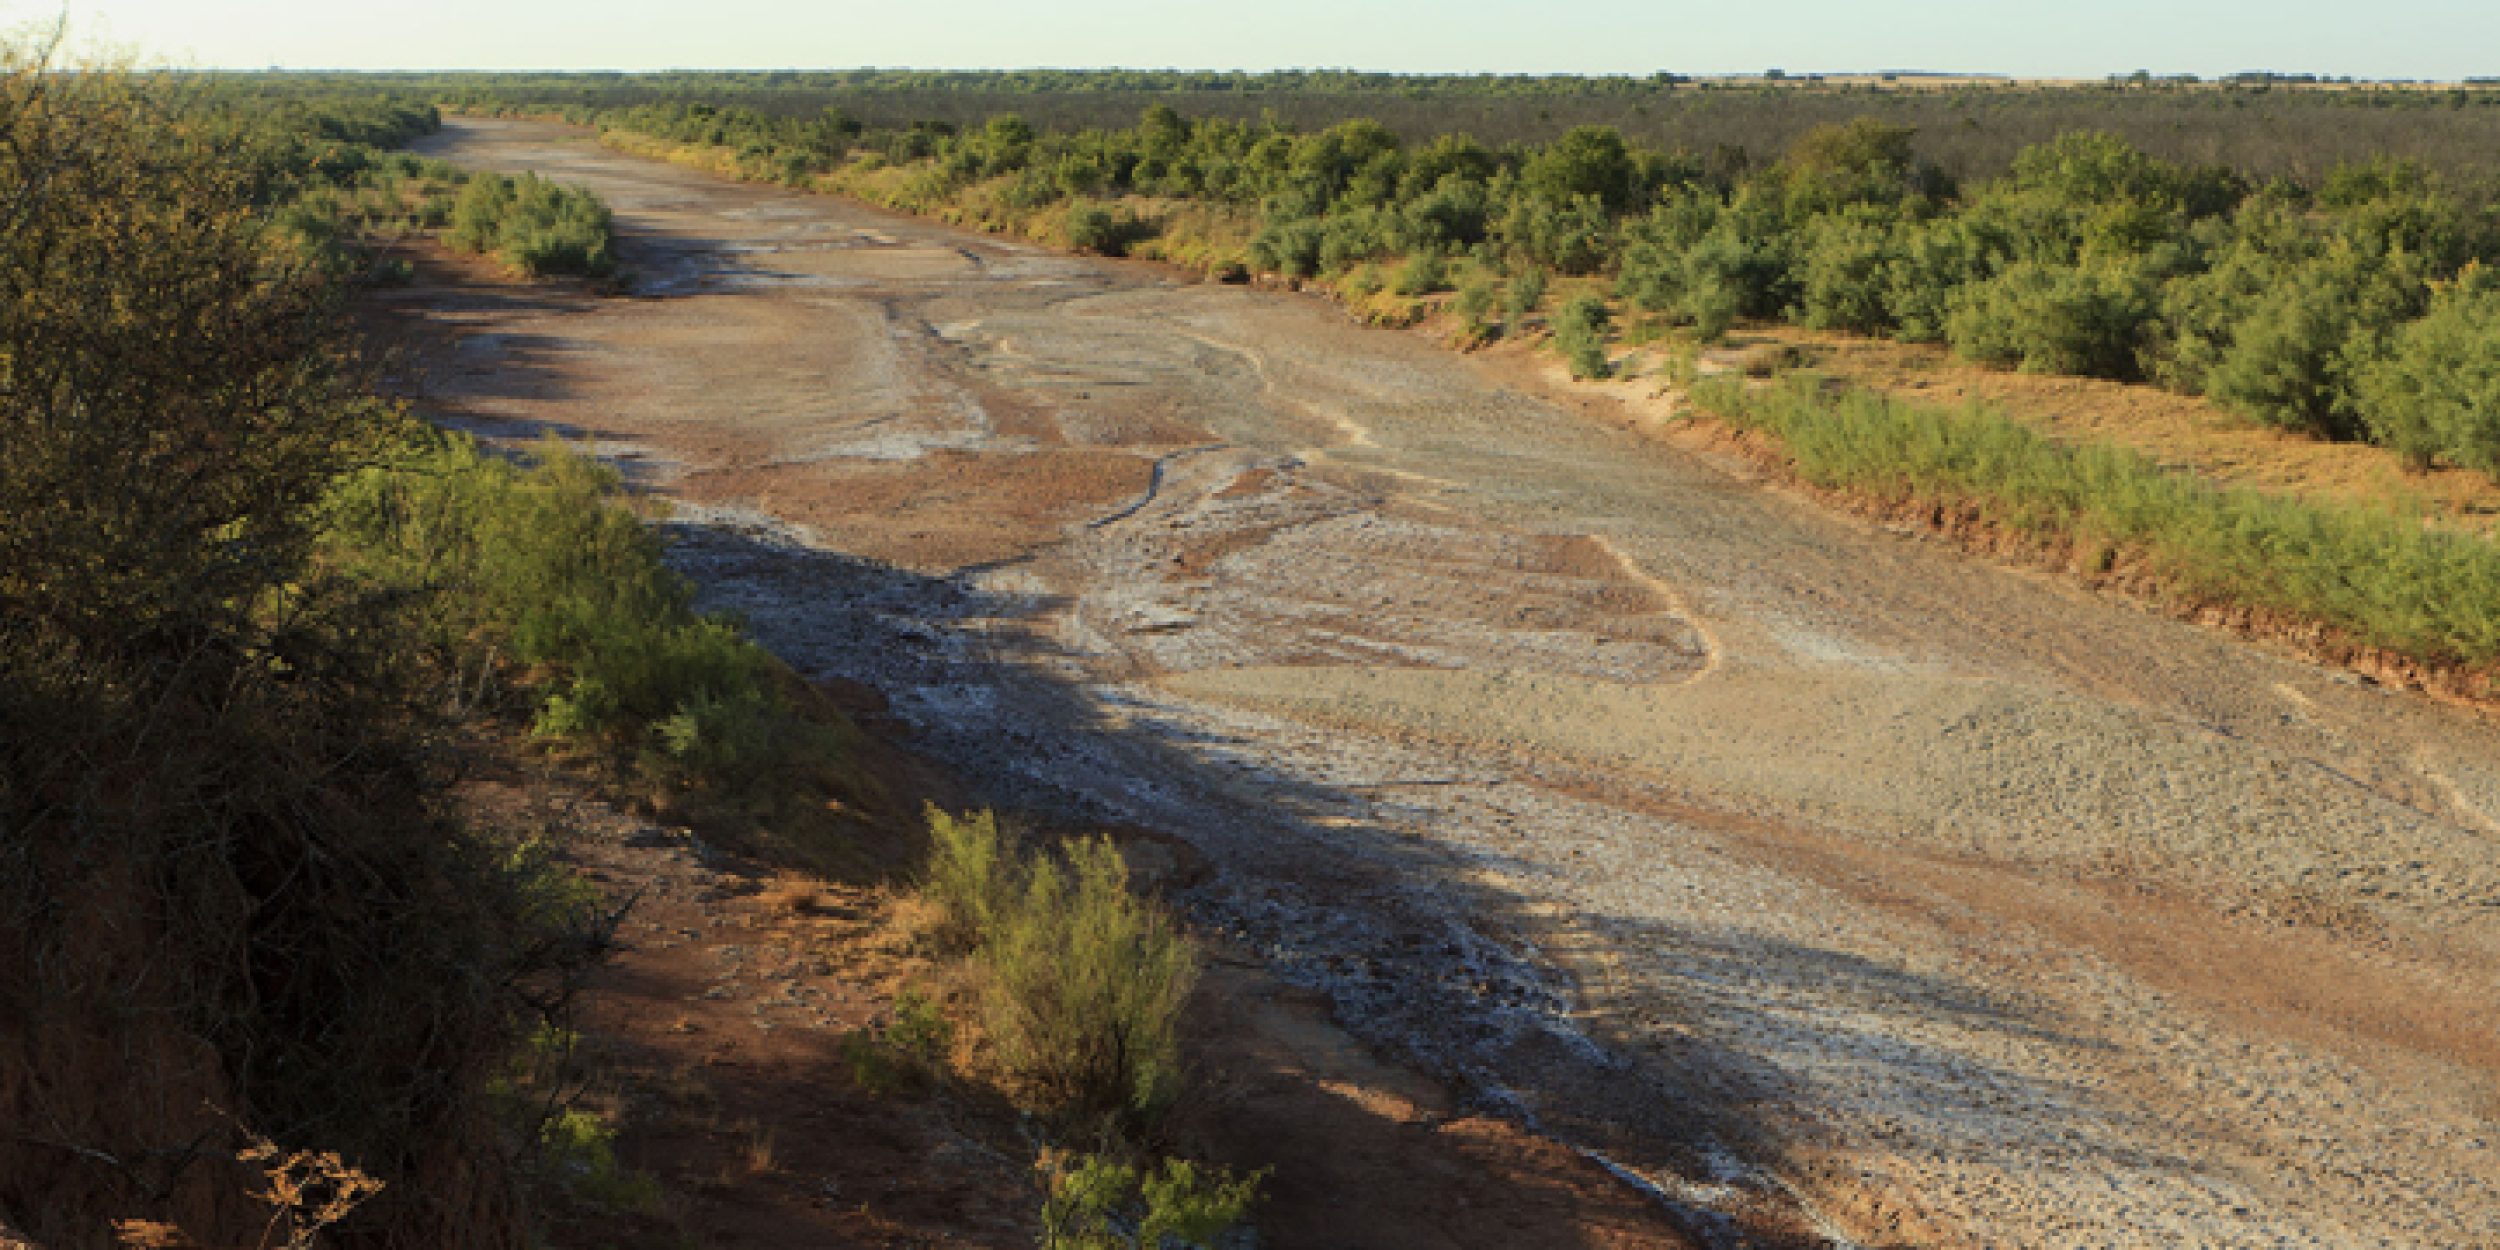 Brazos river runs dry in Knox County, Texas during the summer drought of 2011